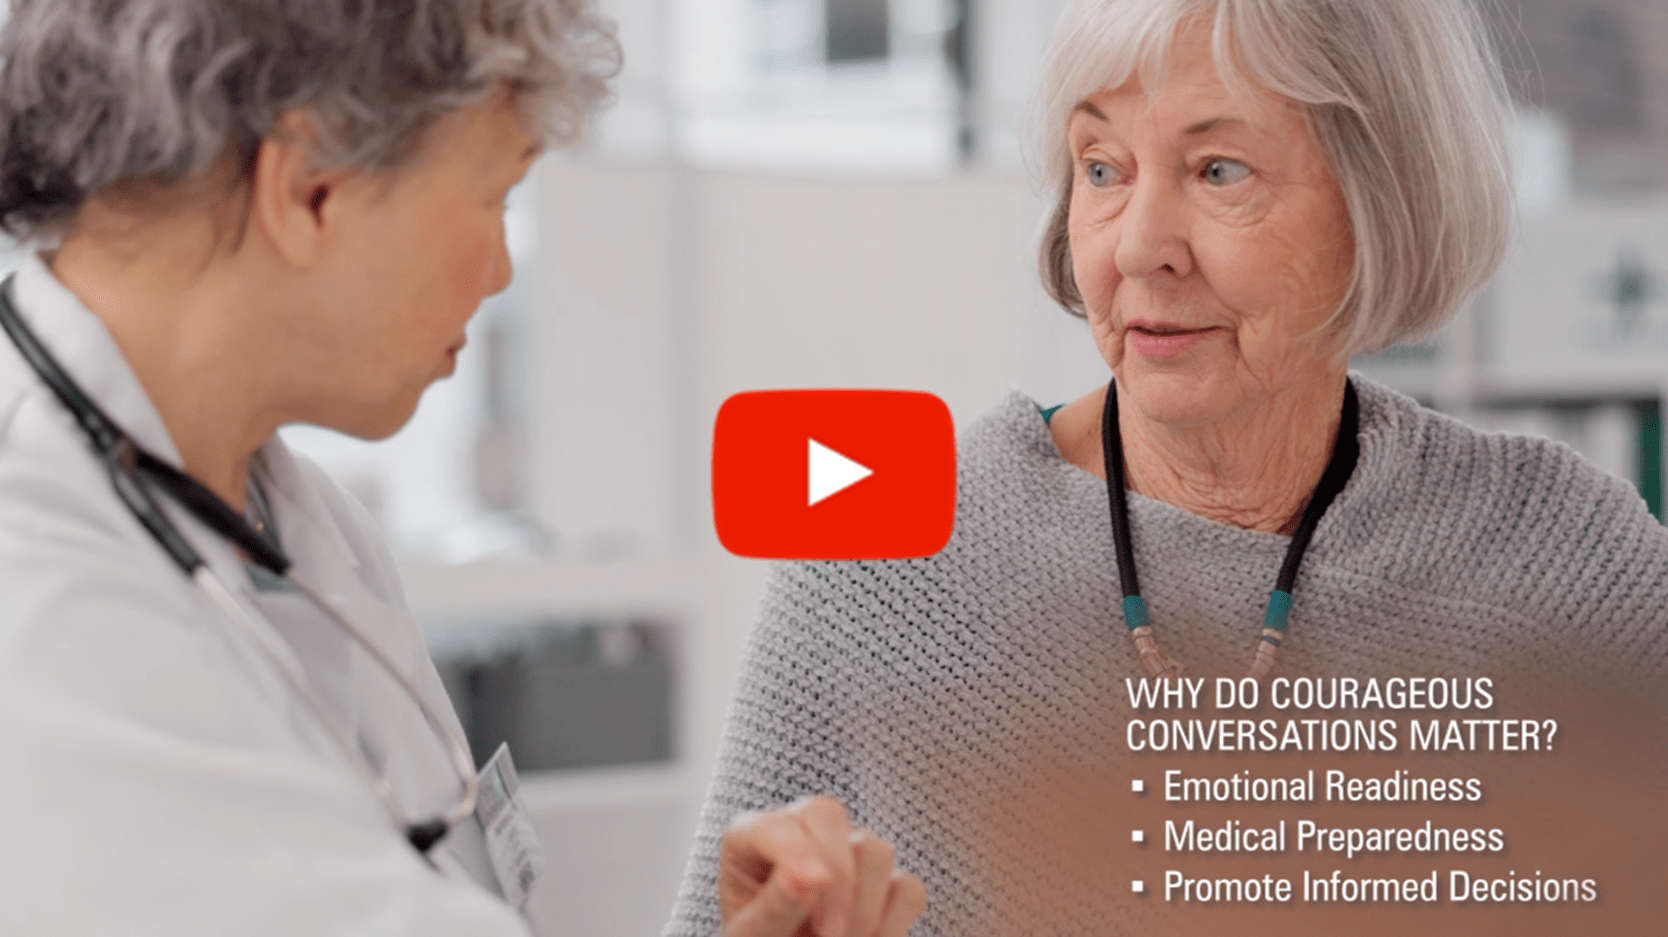 A doctor engaging in courageous conversations with a patient in a video.